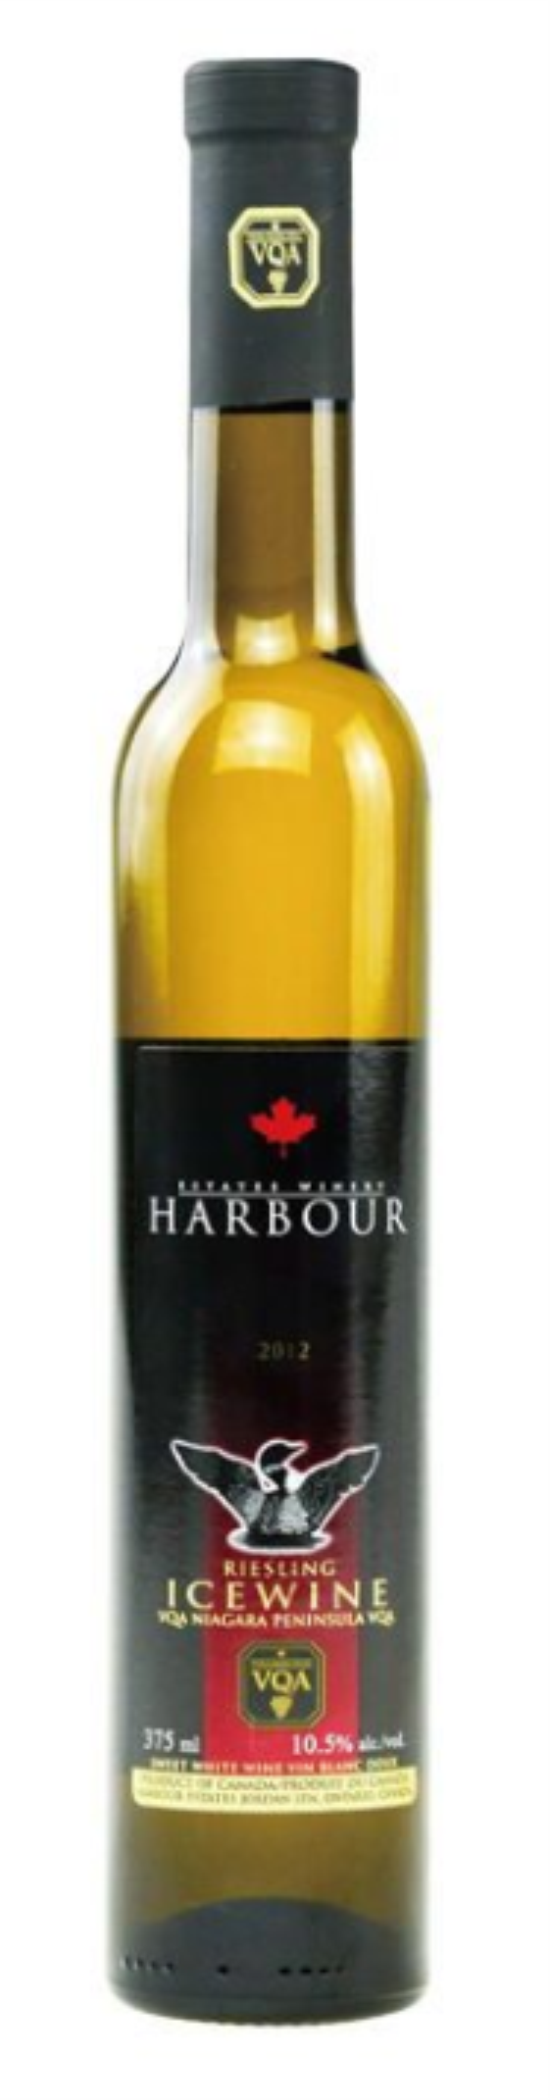 Harbour Riesling